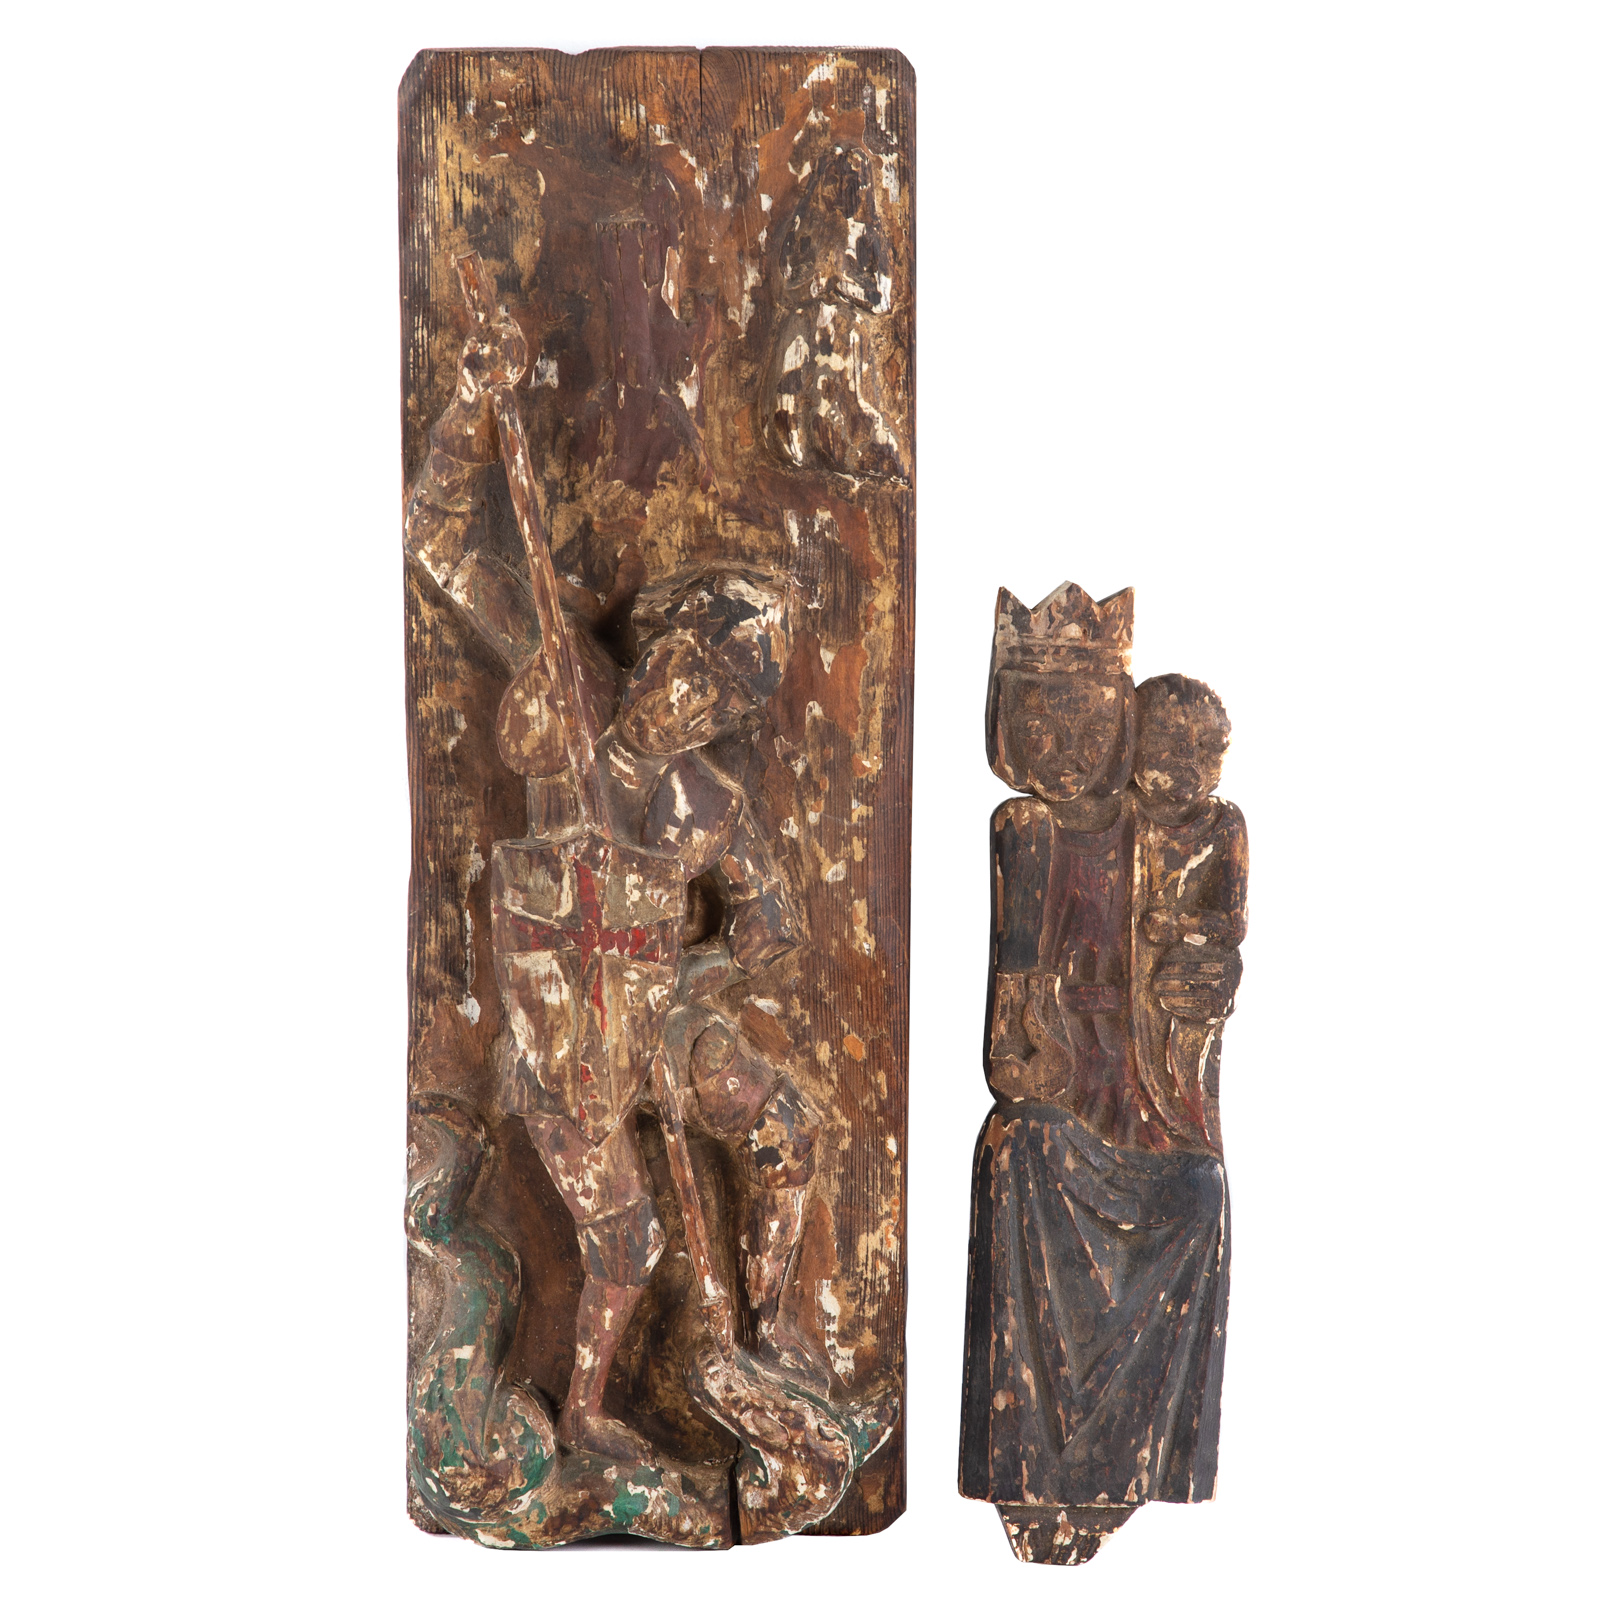 TWO SPANISH RELIGIOUS CARVED WOOD